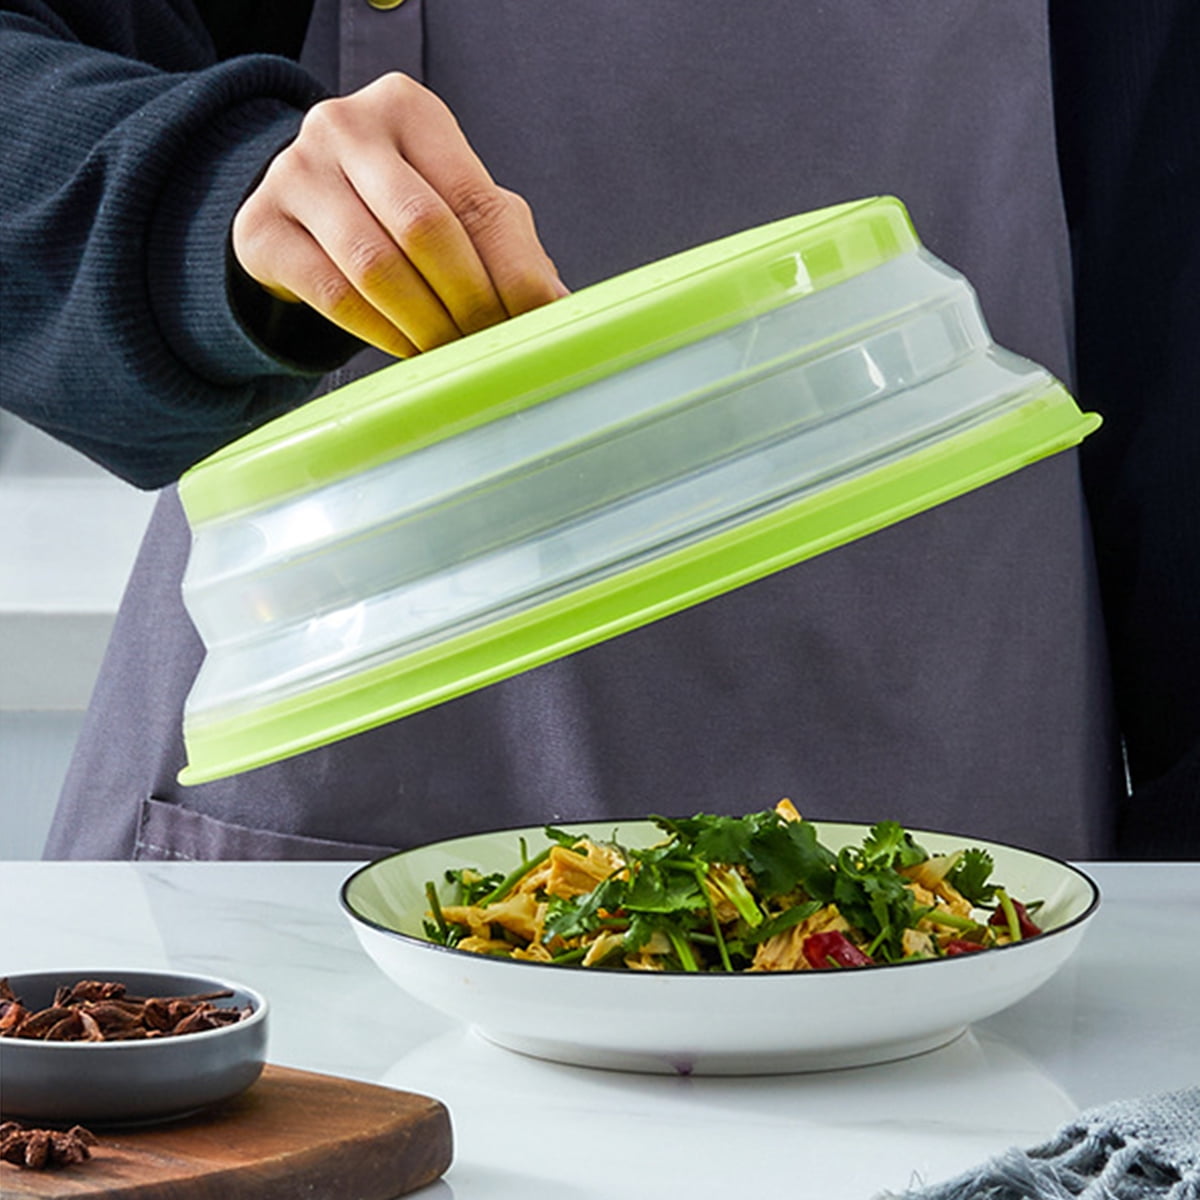  Collapsible Silicone Microwave Cover for Food Splatter